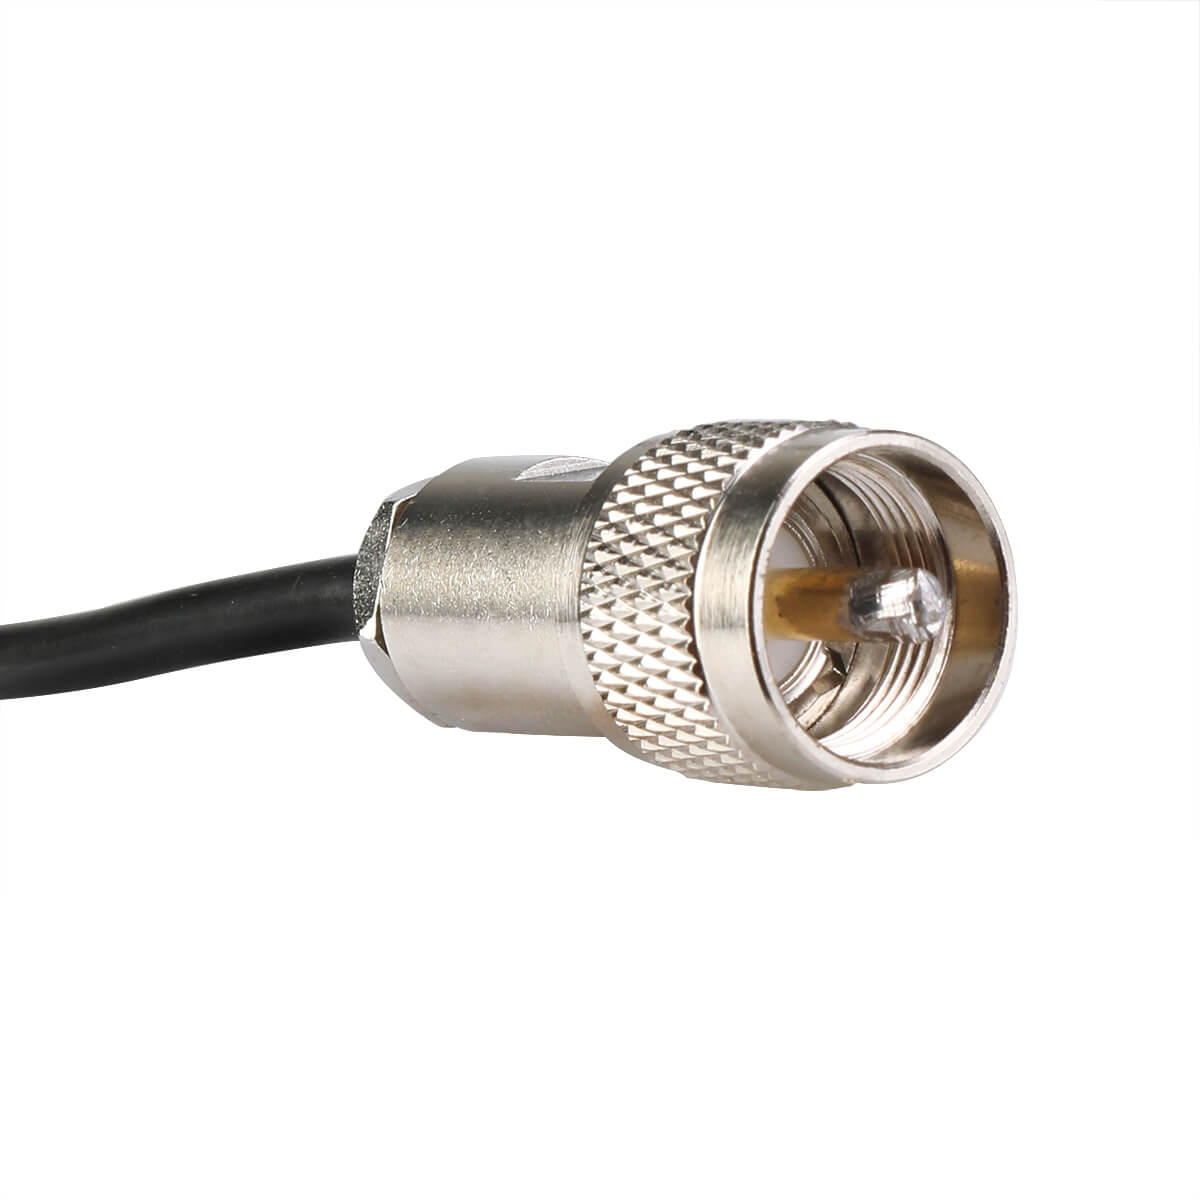 50-3 Pure Copper Low Loss Coaxial Extend Cable.